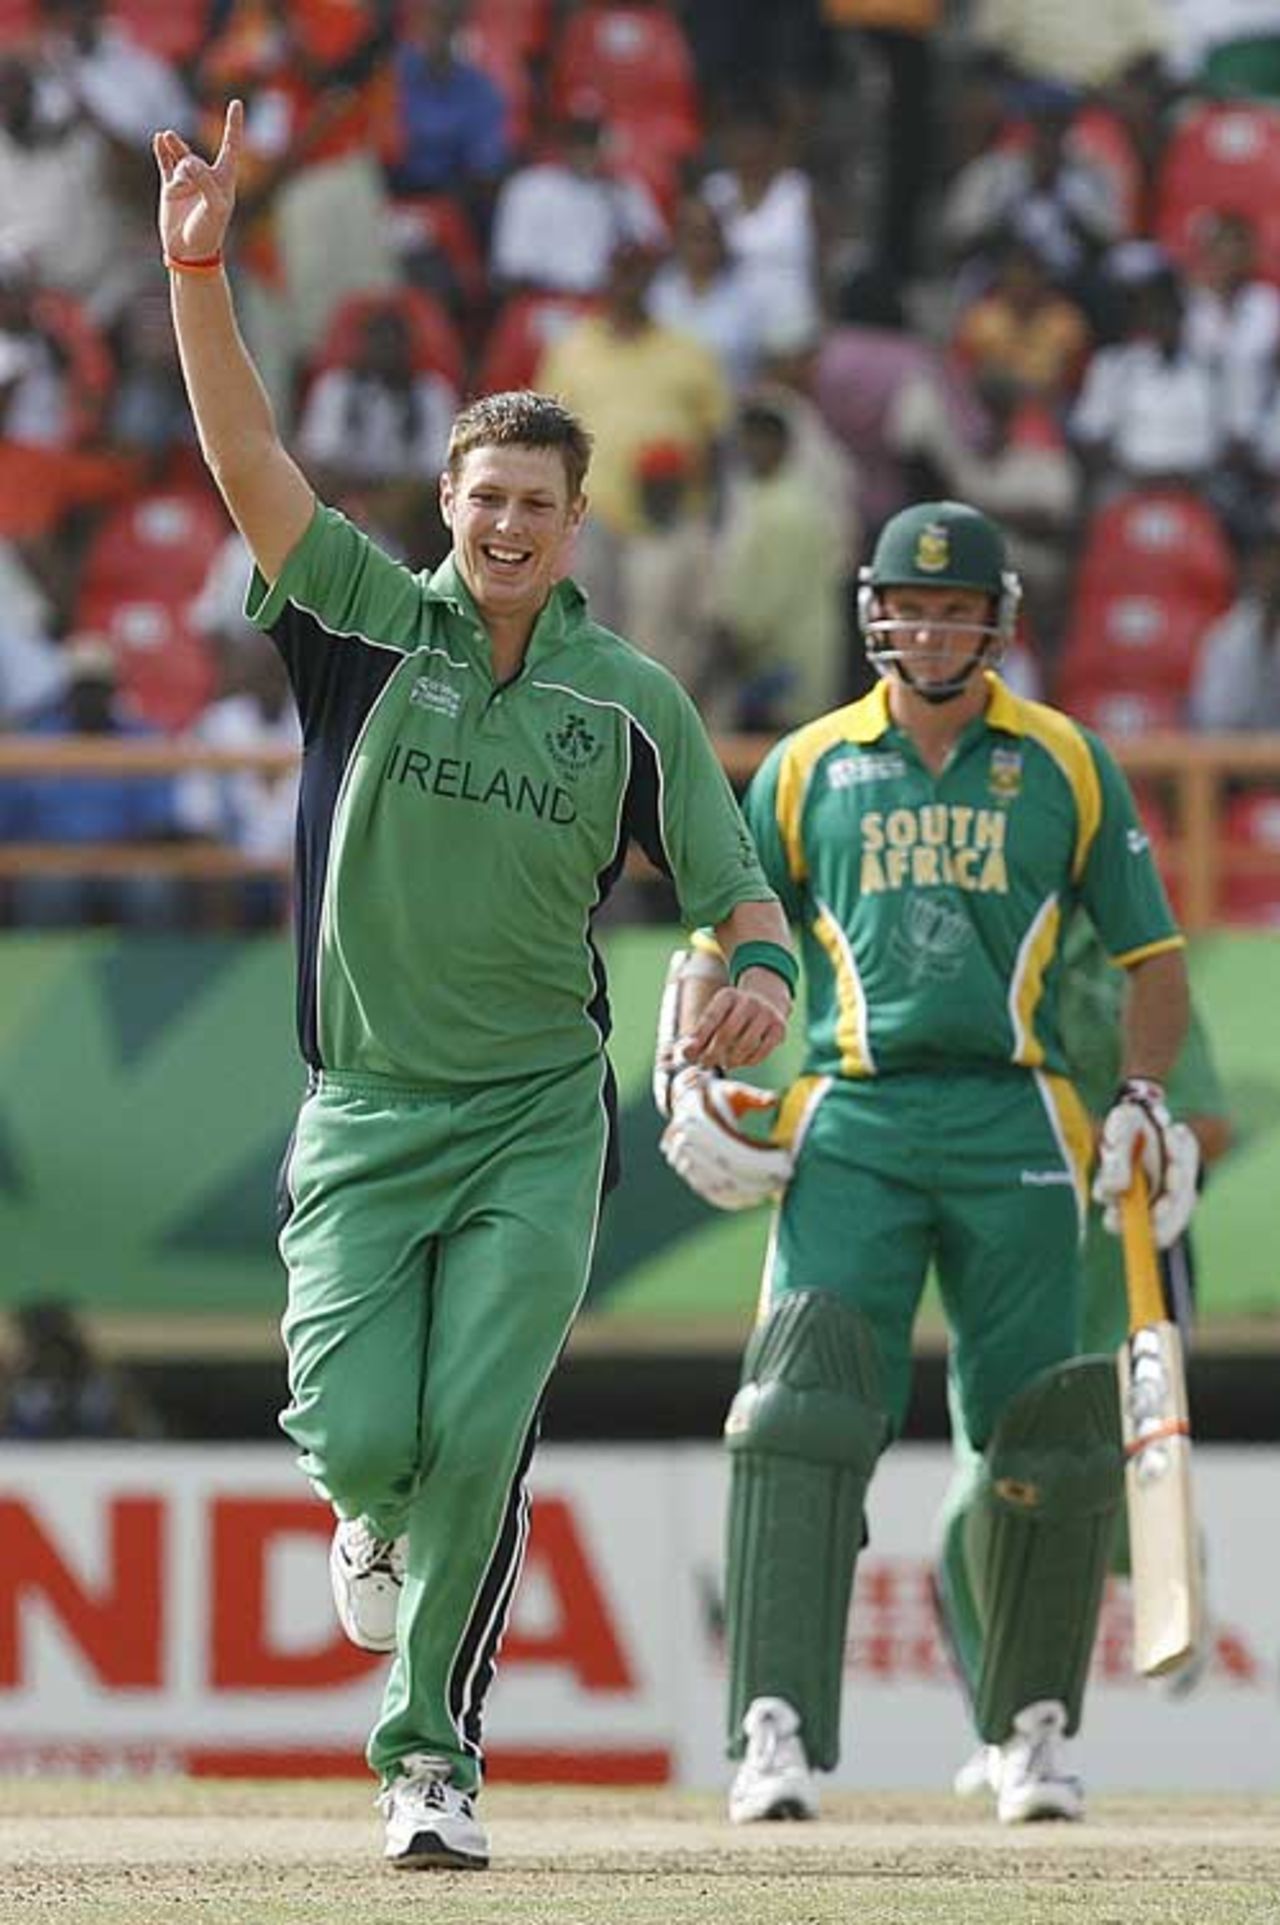 Boyd Rankin removed AB de Villiers in his first over, Ireland v South Africa, Guyana, April 3, 2007